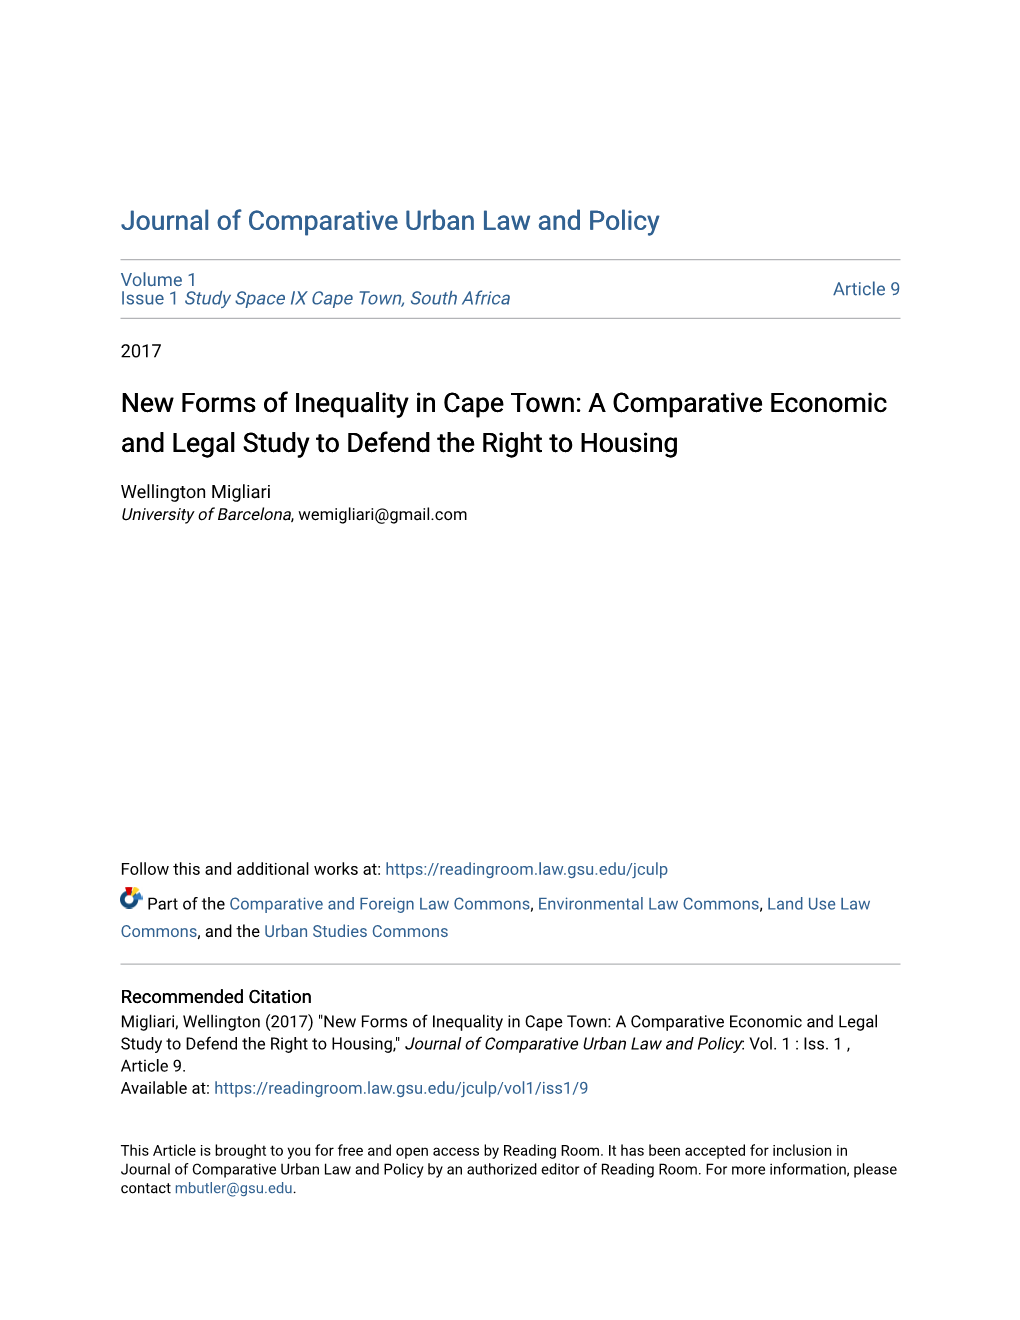 New Forms of Inequality in Cape Town: a Comparative Economic and Legal Study to Defend the Right to Housing